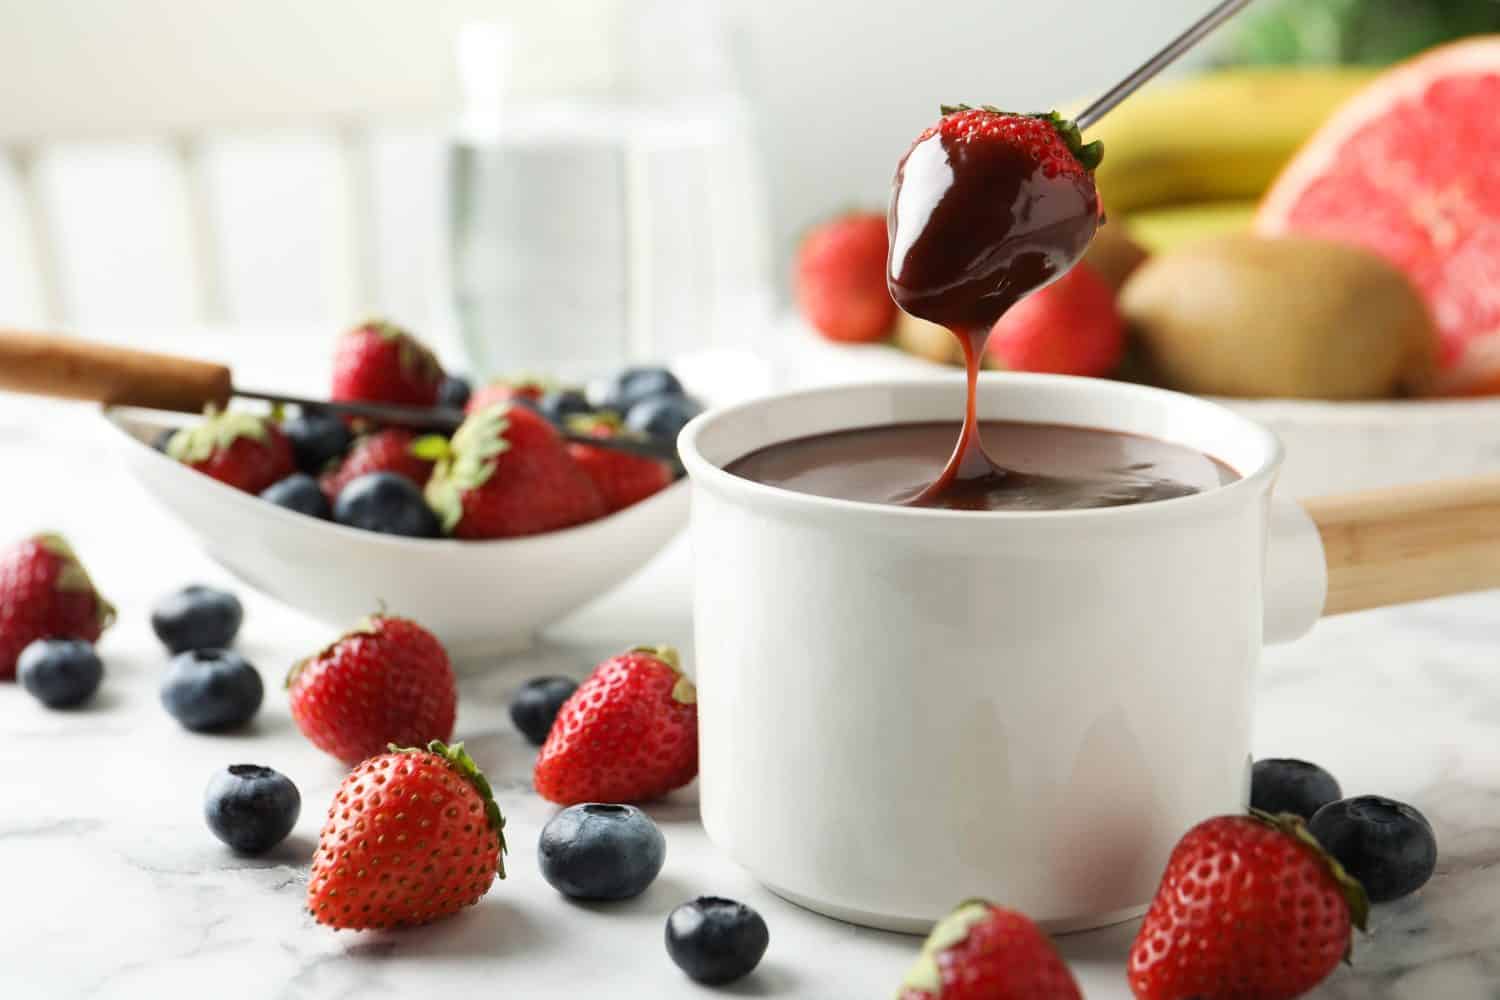 Dipping strawberry into fondue pot with chocolate on white marble table